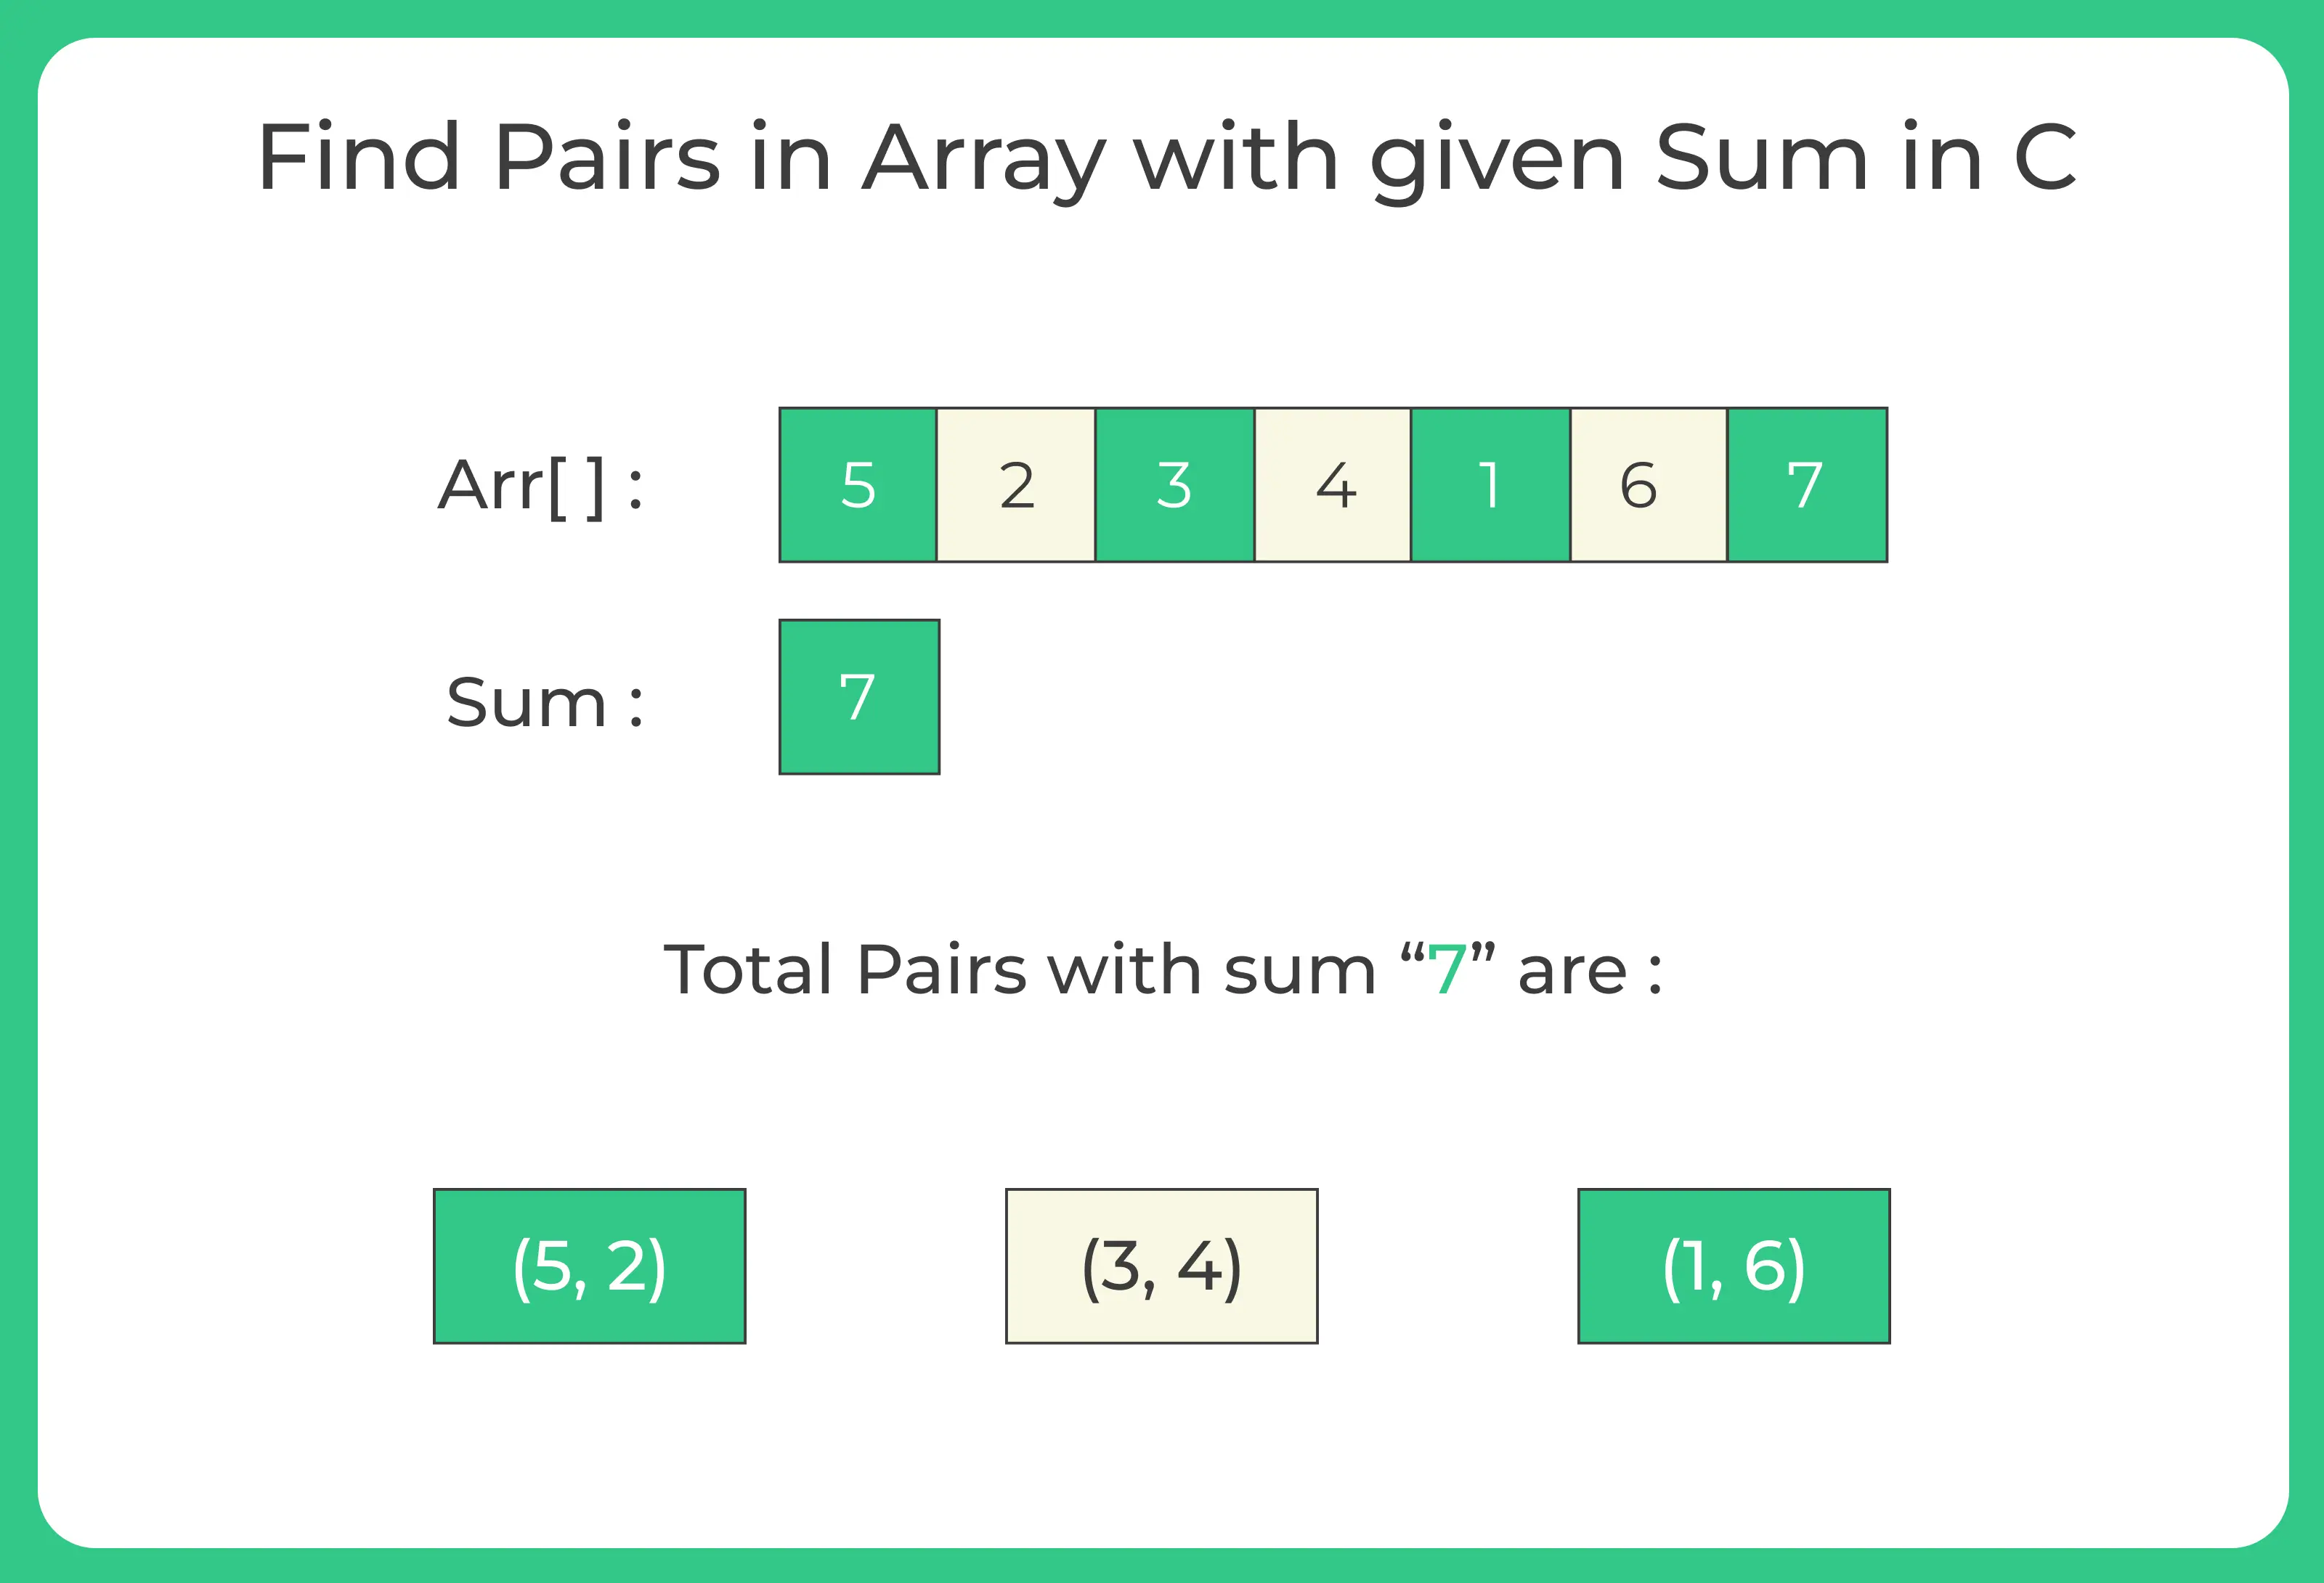 Find Pairs in Array with given Sum in C